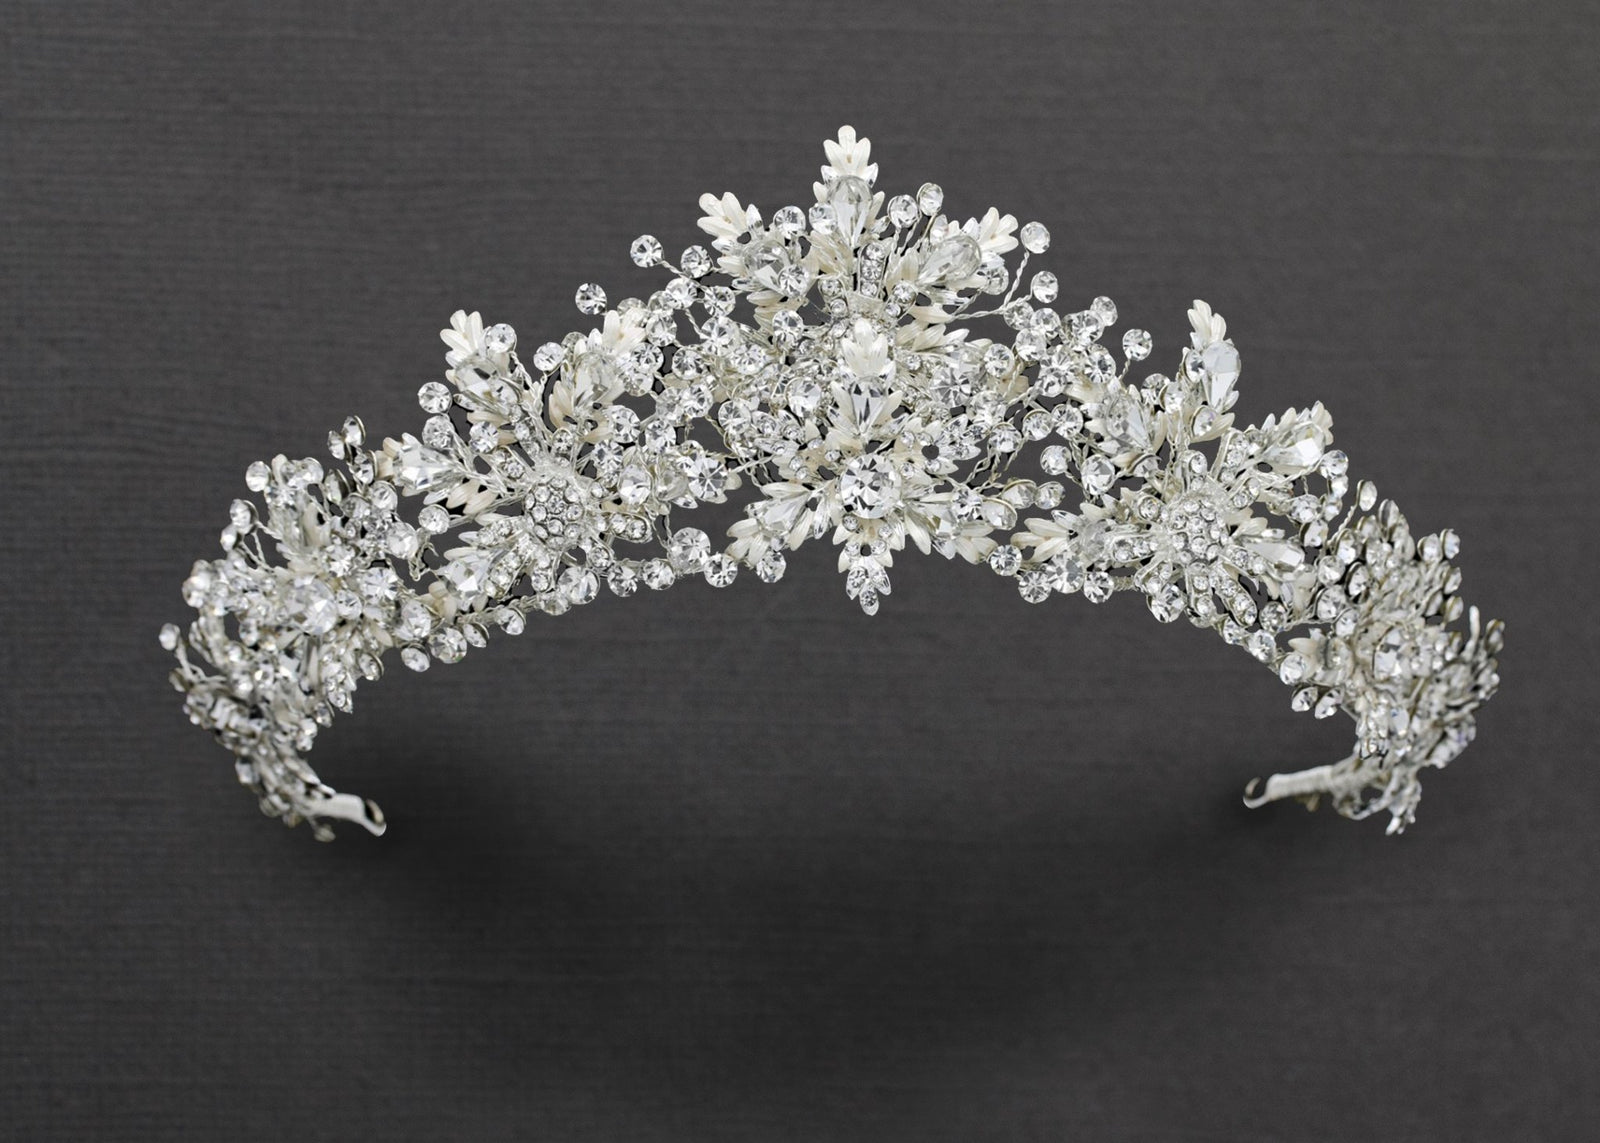 Bridal Tiara of Ivory Frosted Flowers and Jewels - Cassandra Lynne